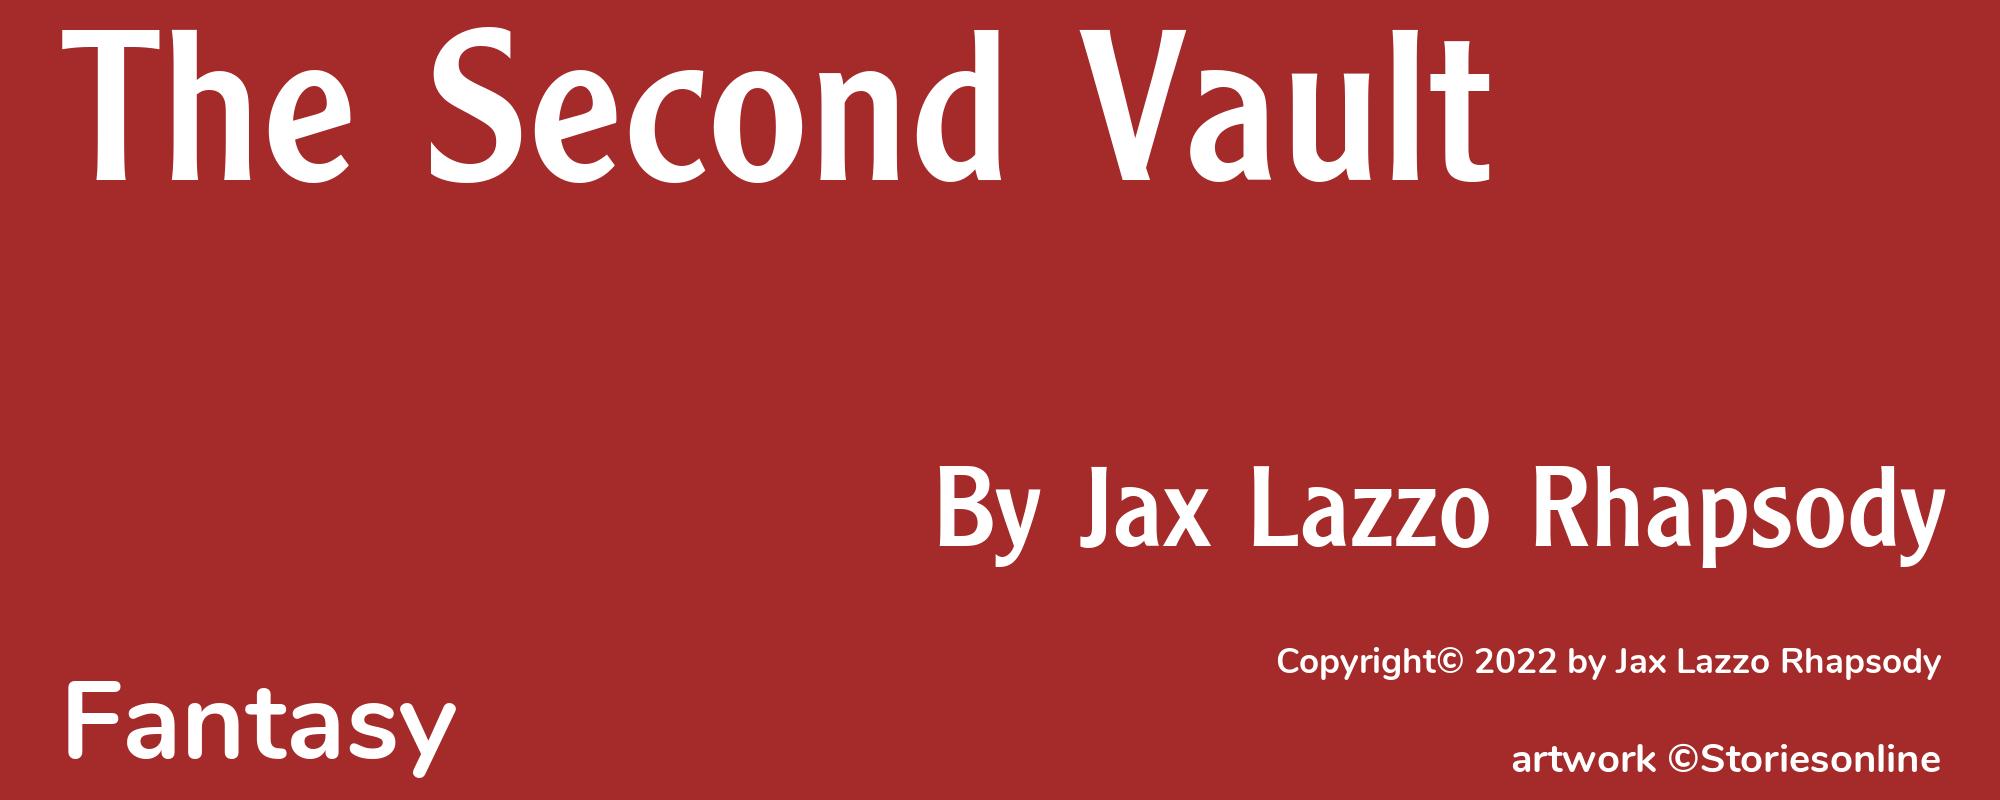 The Second Vault - Cover